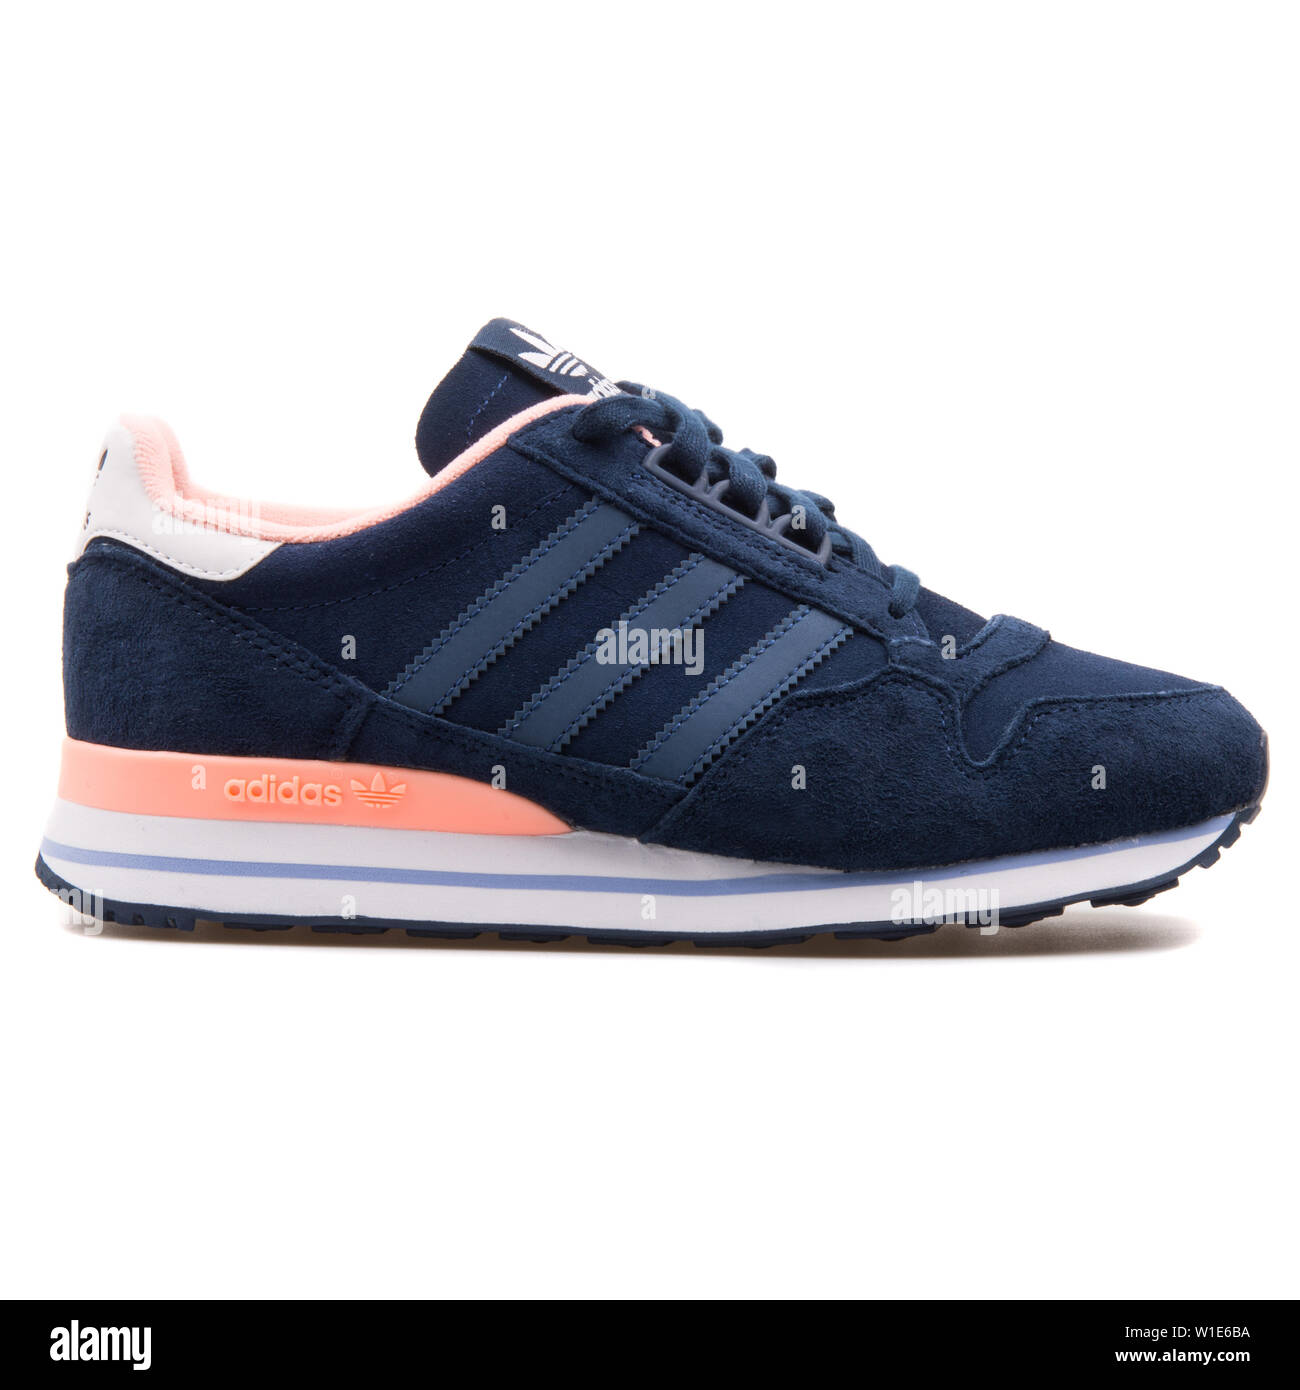 adidas zx 500 Rose homme